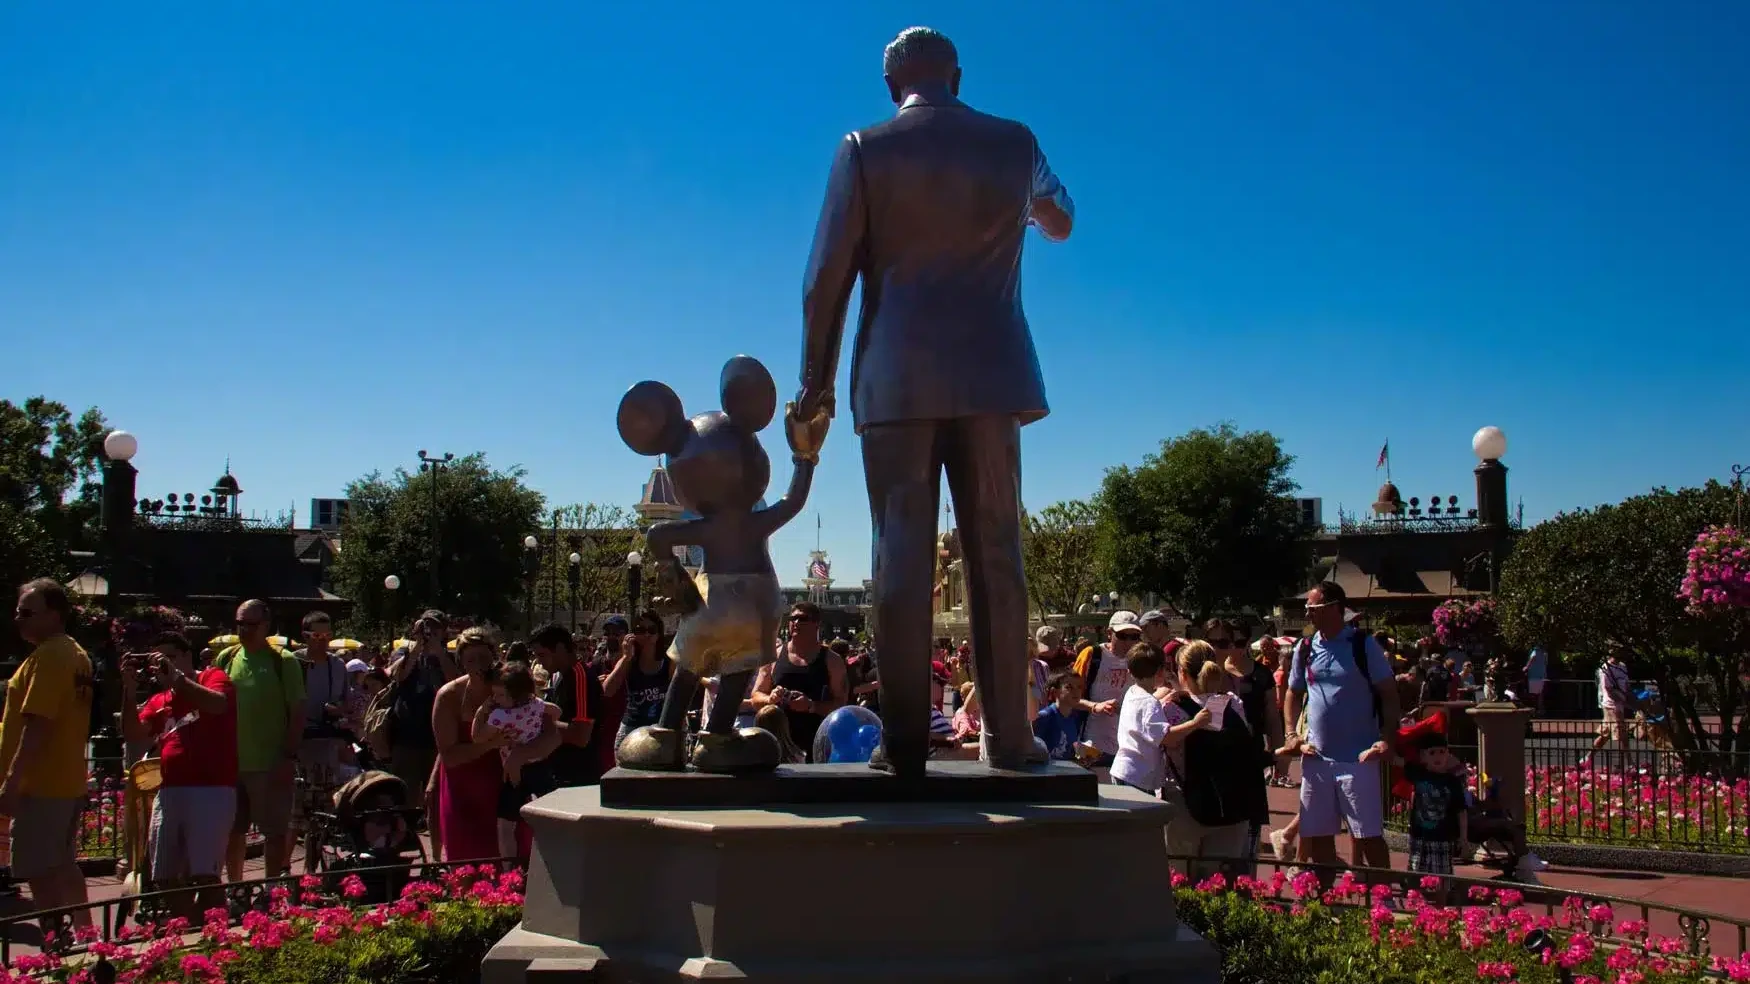 Partners Statue from behind - Magic Kingdom iconic statue of Mickey Mouse and Walt Disney holding hands facing Main Street USA